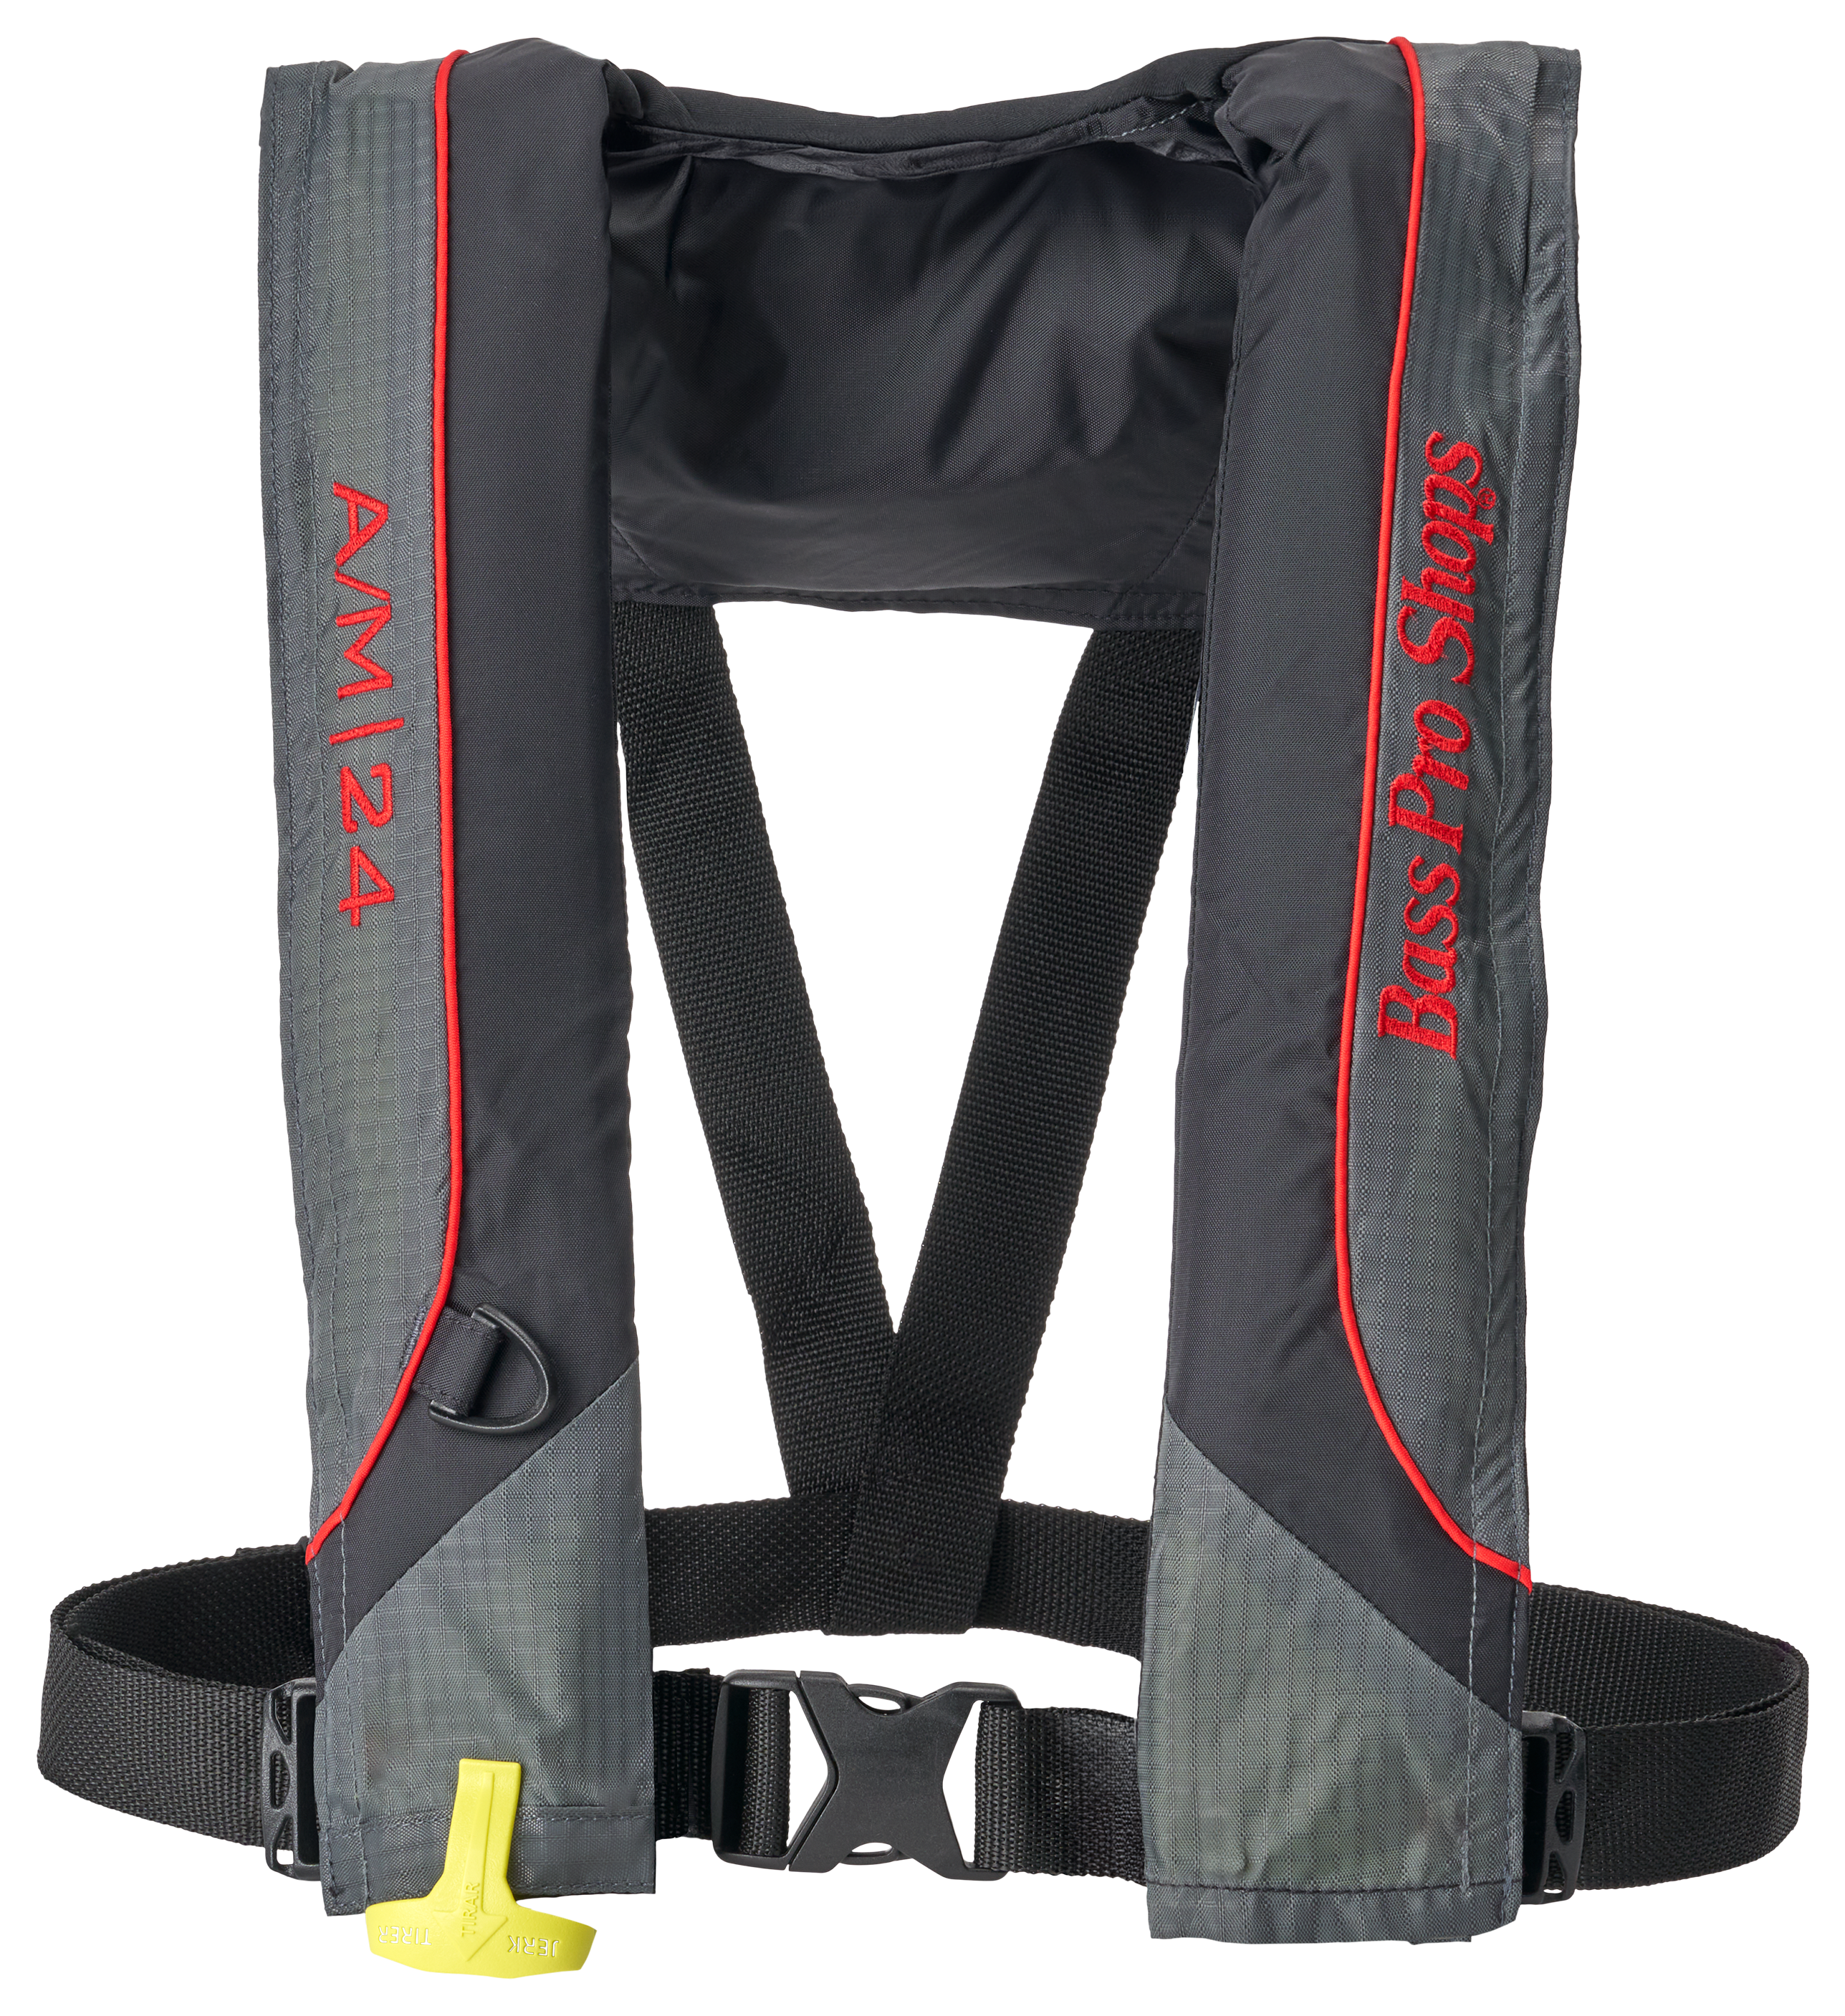 Bass Pro Shops AM24 Auto Manual Inflatable Life Vest - Black Gray Red